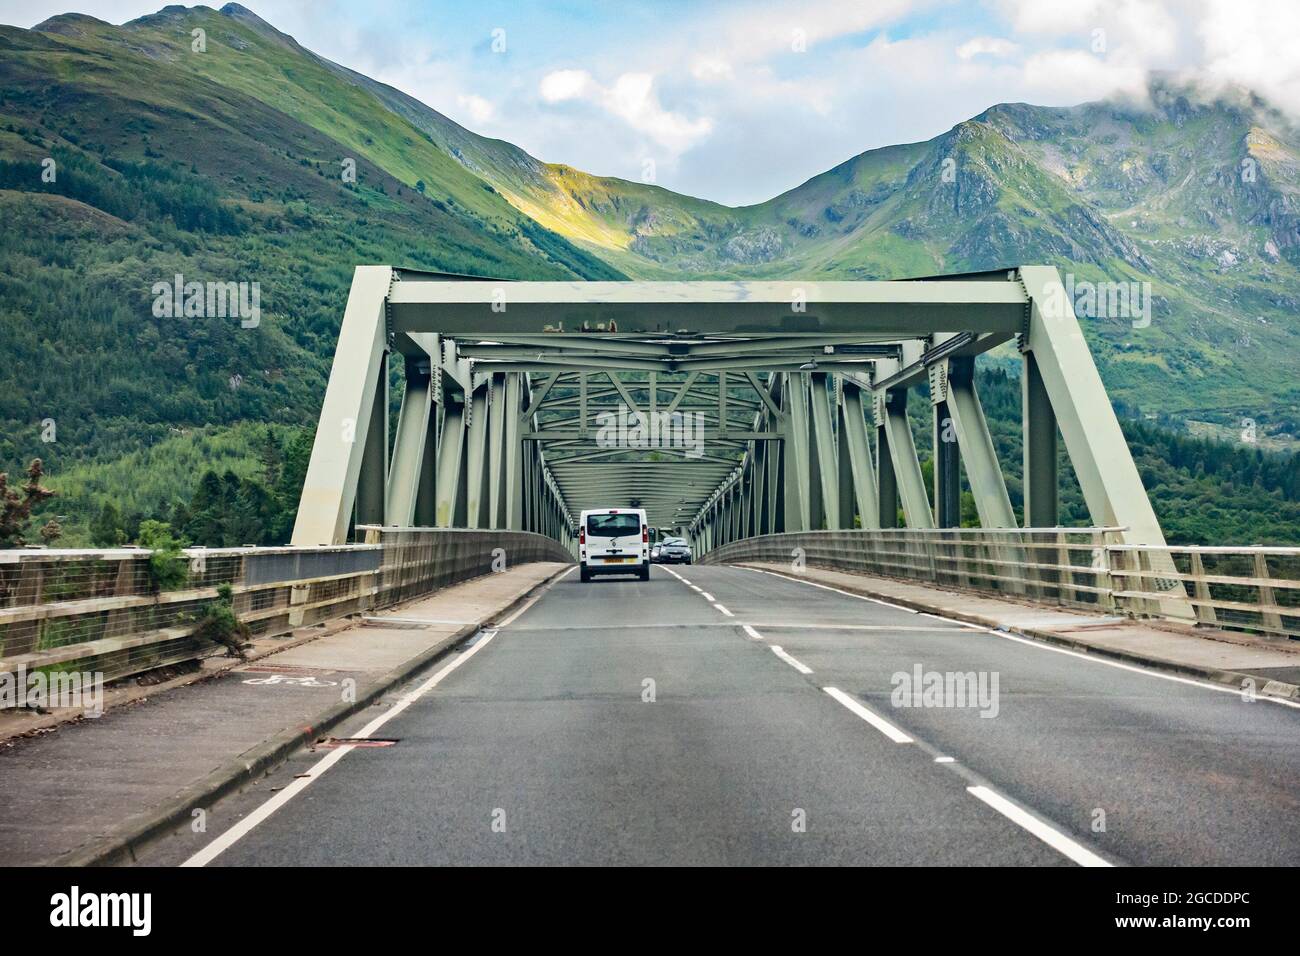 Cars on the Ballachulish Bridge (Opened Dec 1975), a steel truss cantilever bridge which links the villages of North & South Ballachulish. Stock Photo